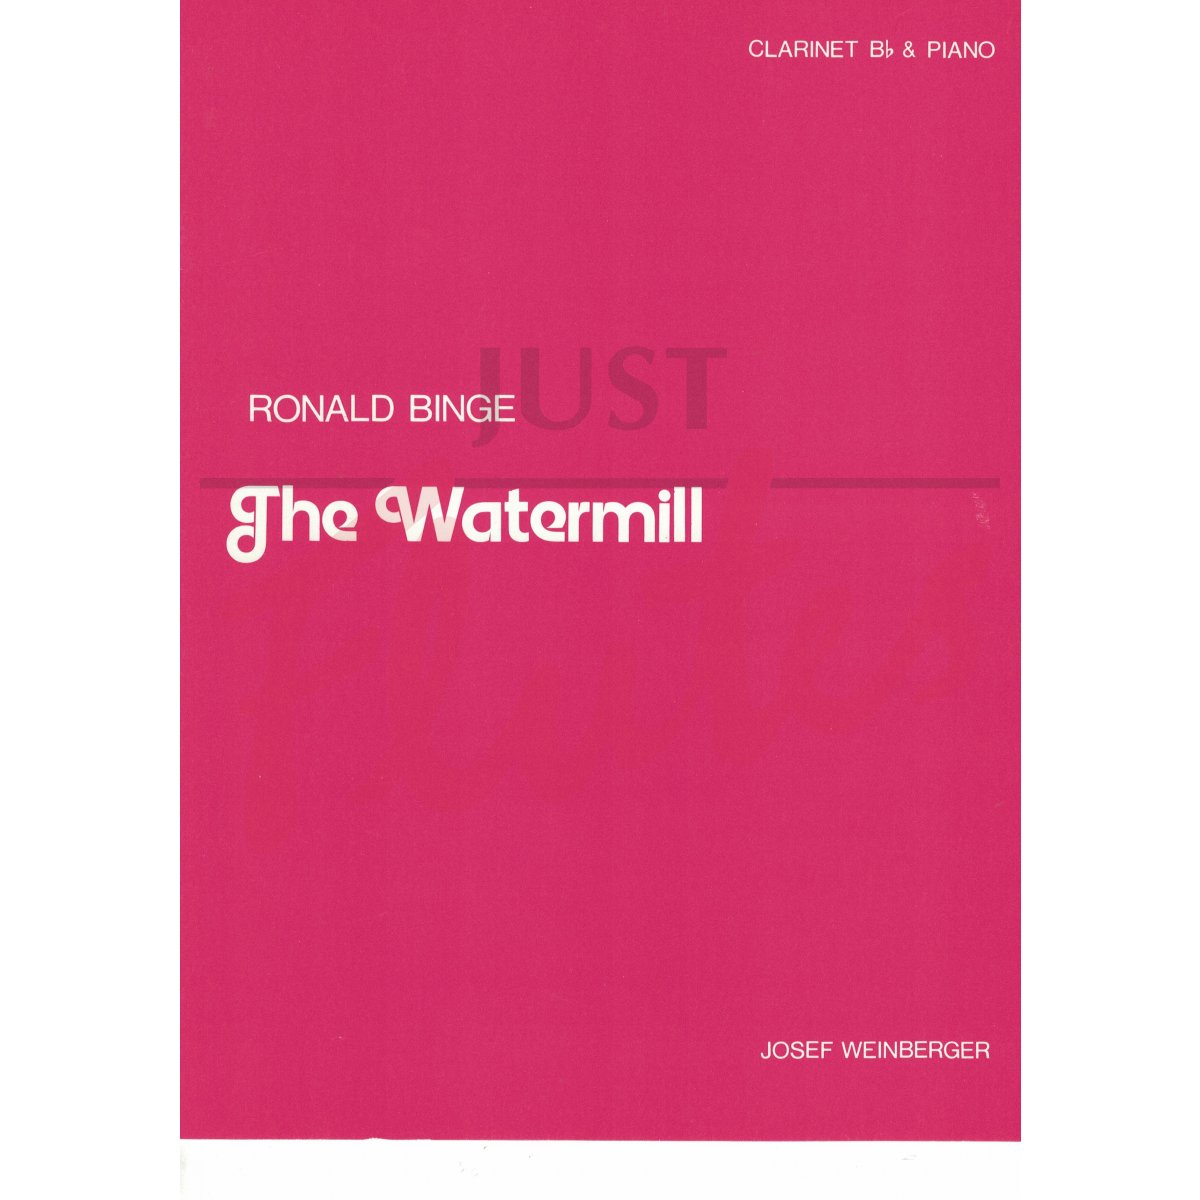 The Watermill for Clarinet and Piano